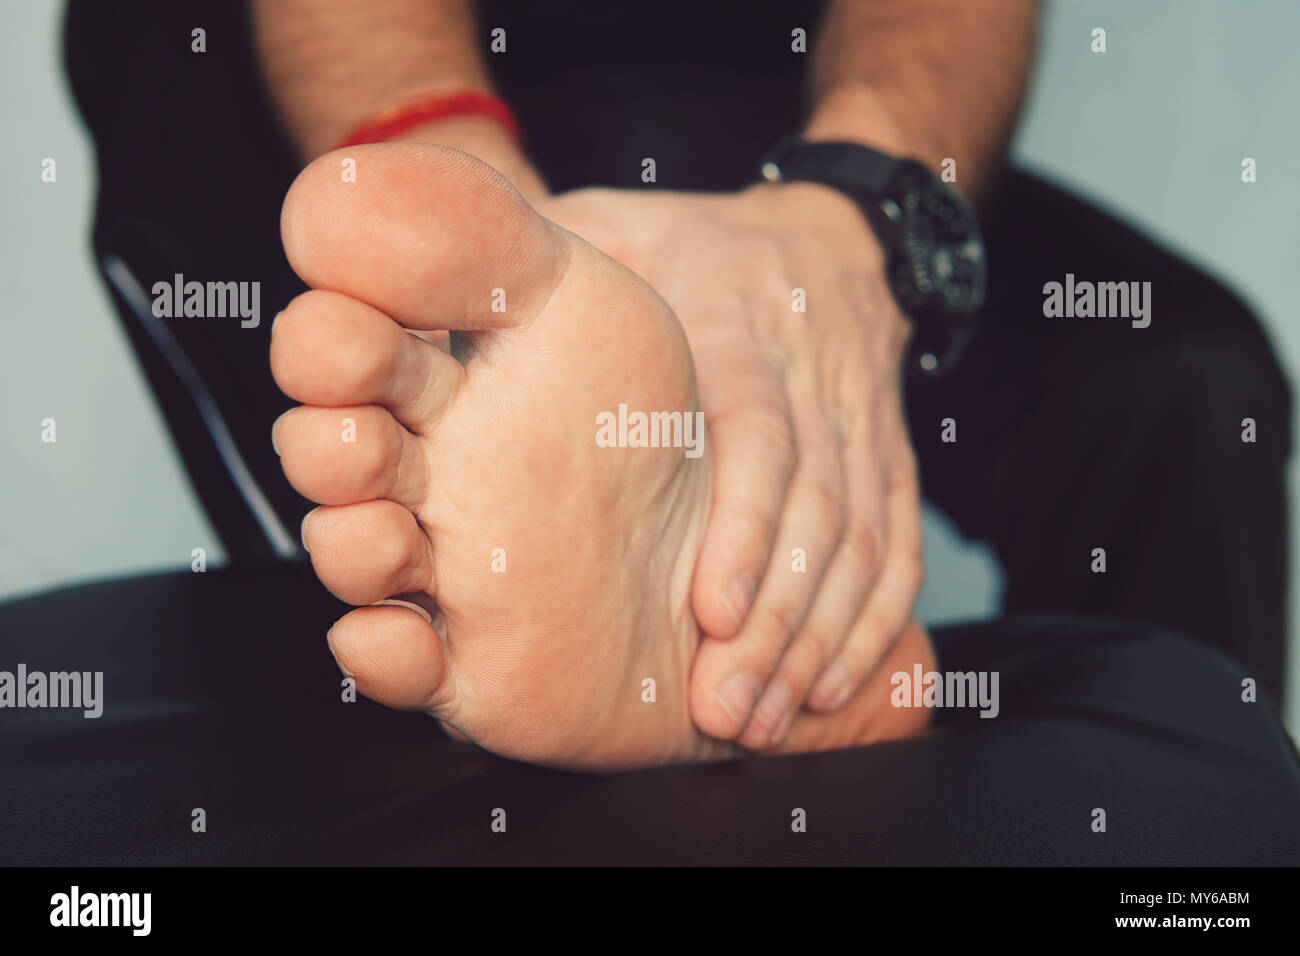 Man's hand being massaged a foot. Man with painful and inflamed gout on his foot around the big toe area. Stock Photo